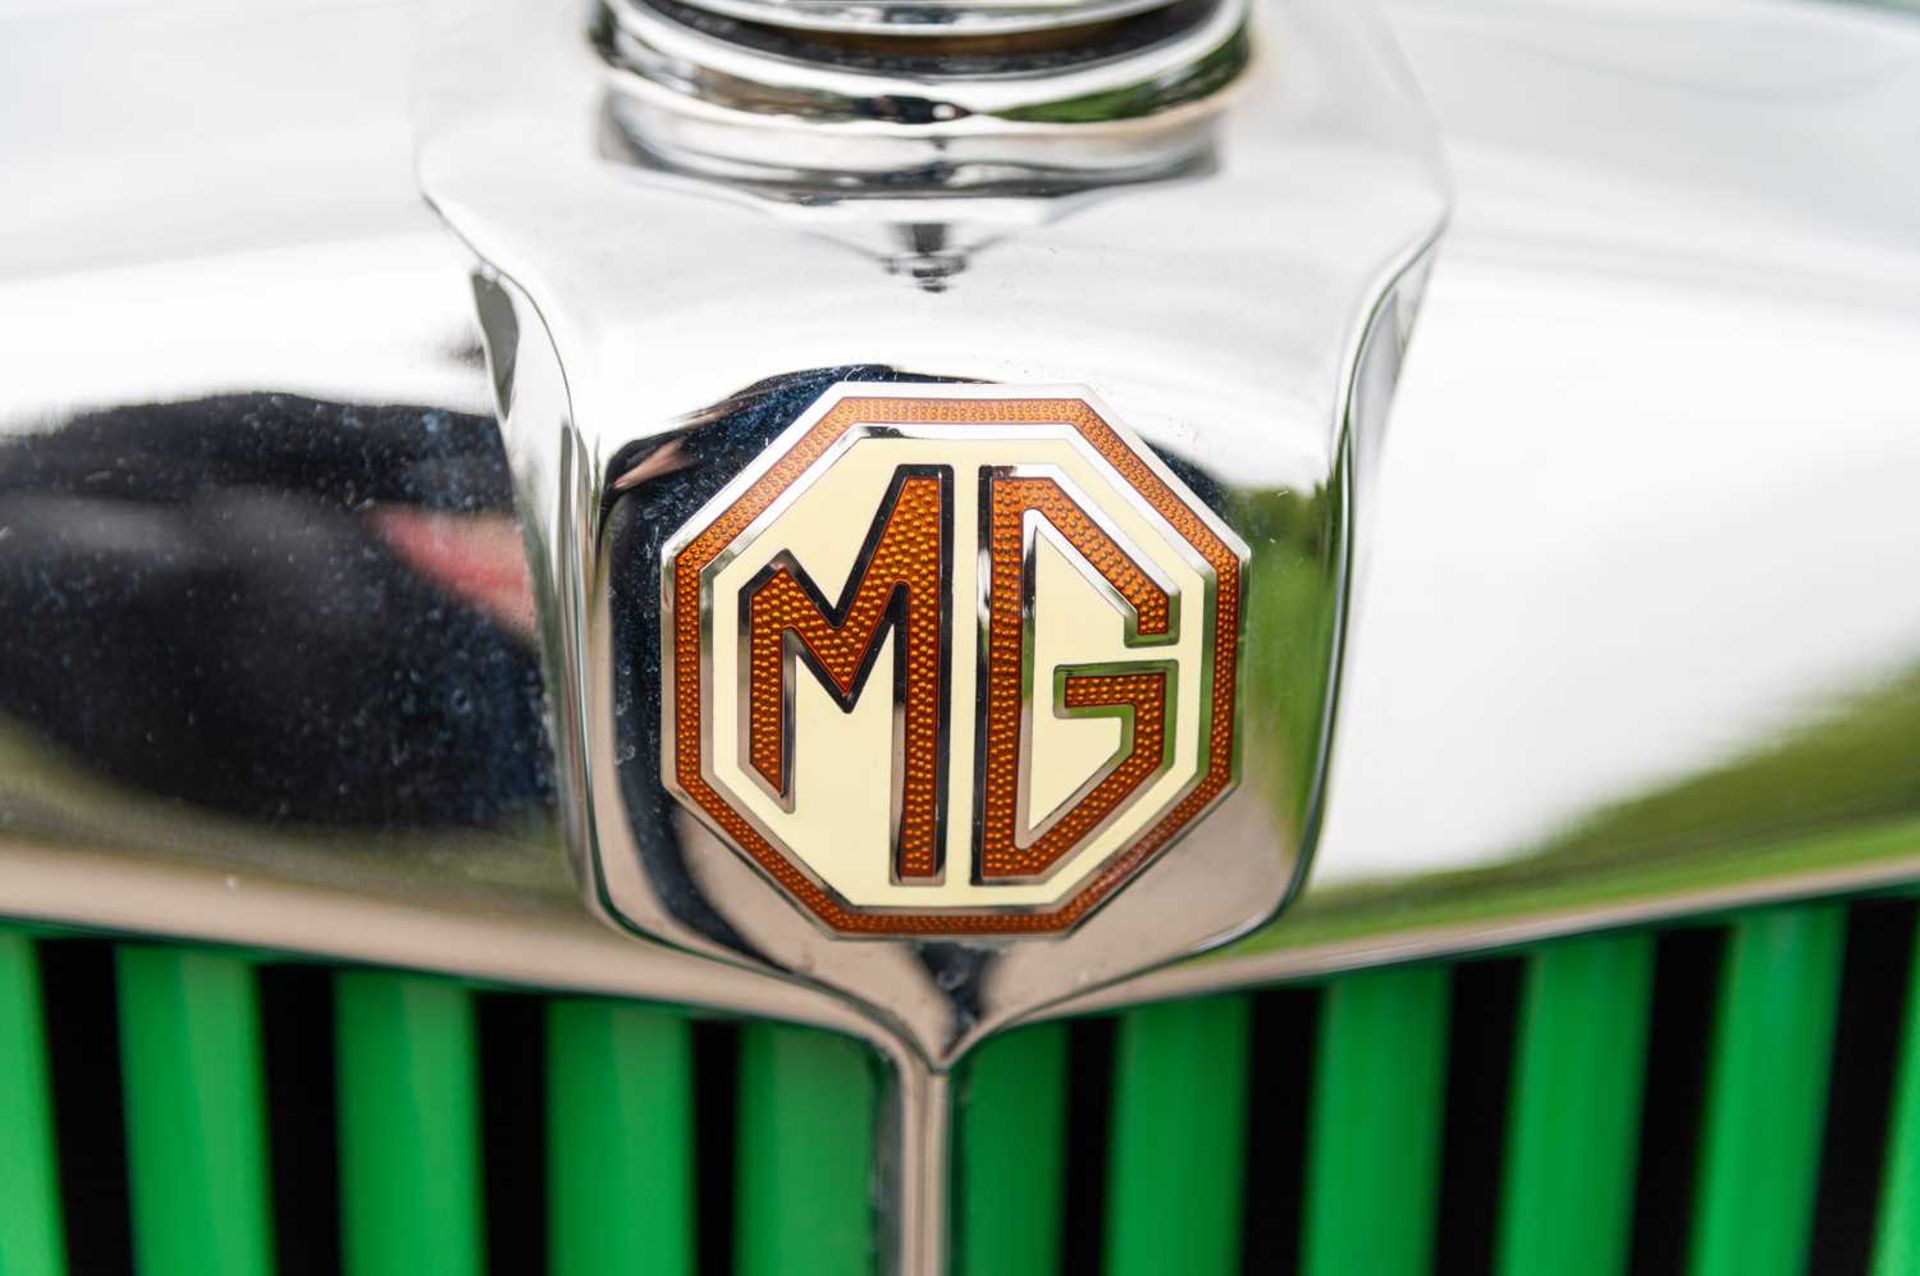 1947 MG TC Midget  Fully restored, right-hand-drive UK home market example - Image 31 of 76